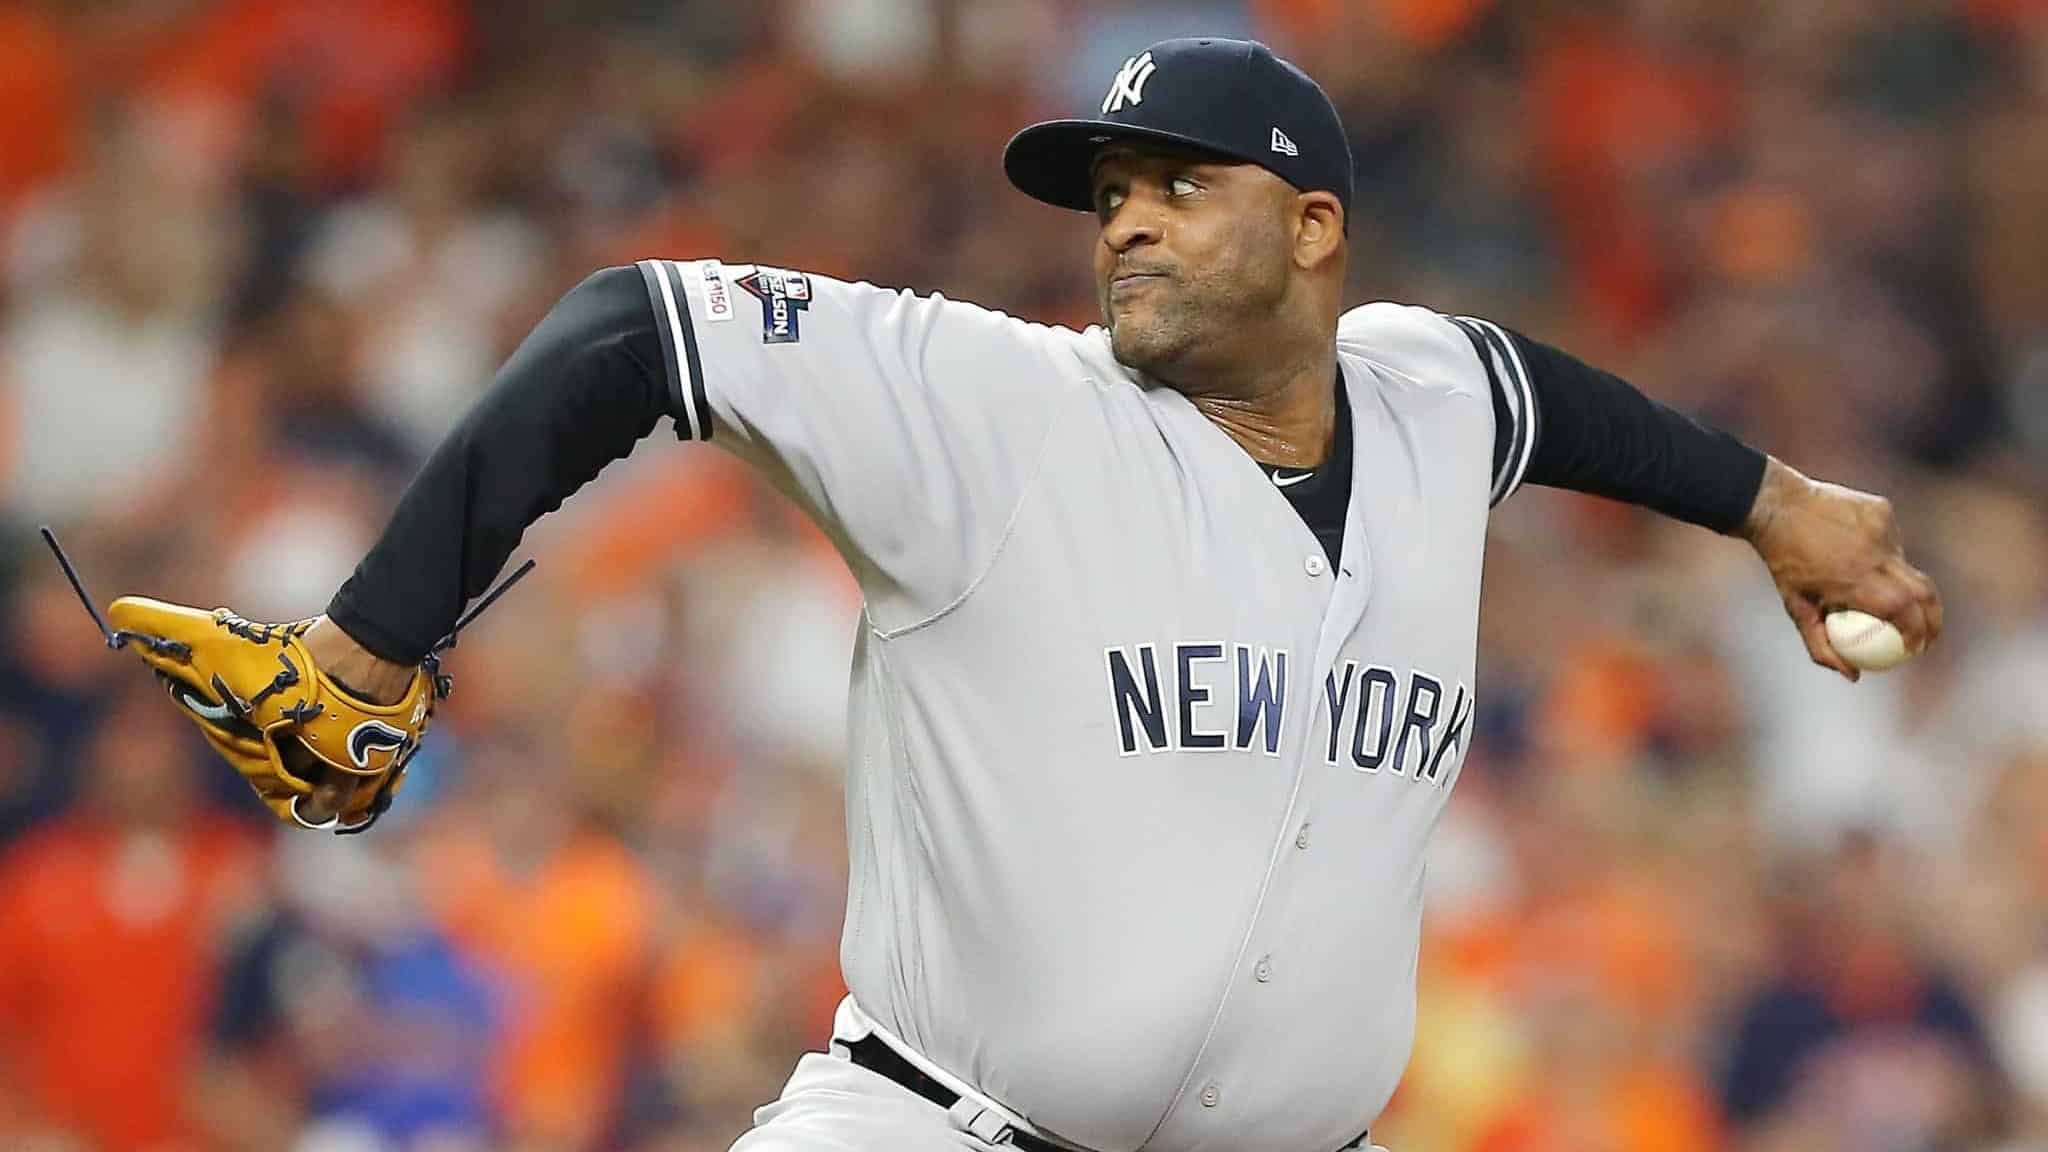 HOUSTON, TEXAS - OCTOBER 13: CC Sabathia #52 of the New York Yankees pitches during the tenth inning against the Houston Astros in game two of the American League Championship Series at Minute Maid Park on October 13, 2019 in Houston, Texas.